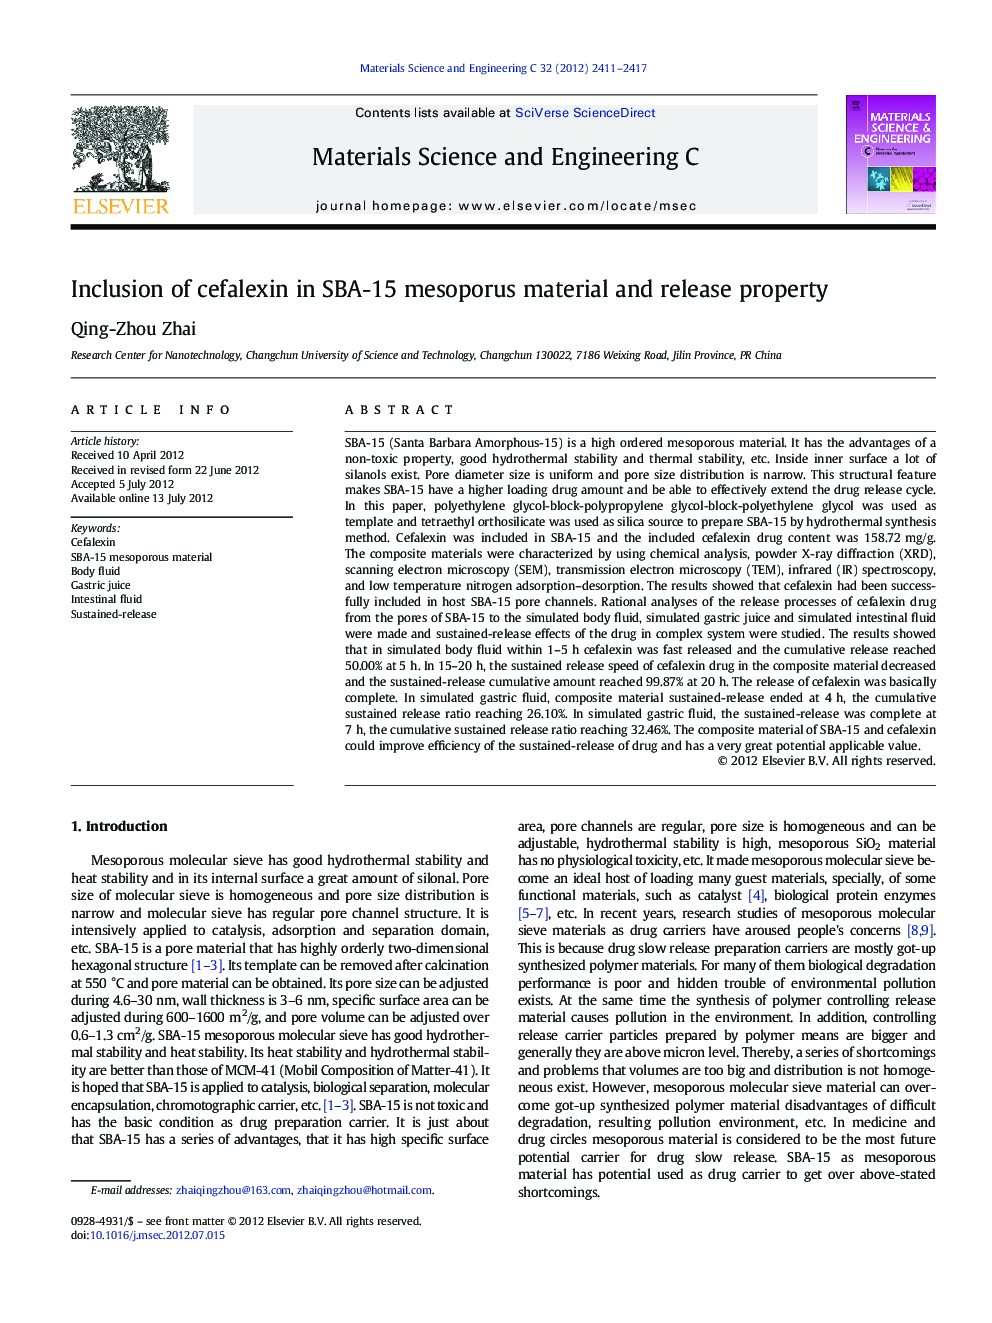 Inclusion of cefalexin in SBA-15 mesoporus material and release property